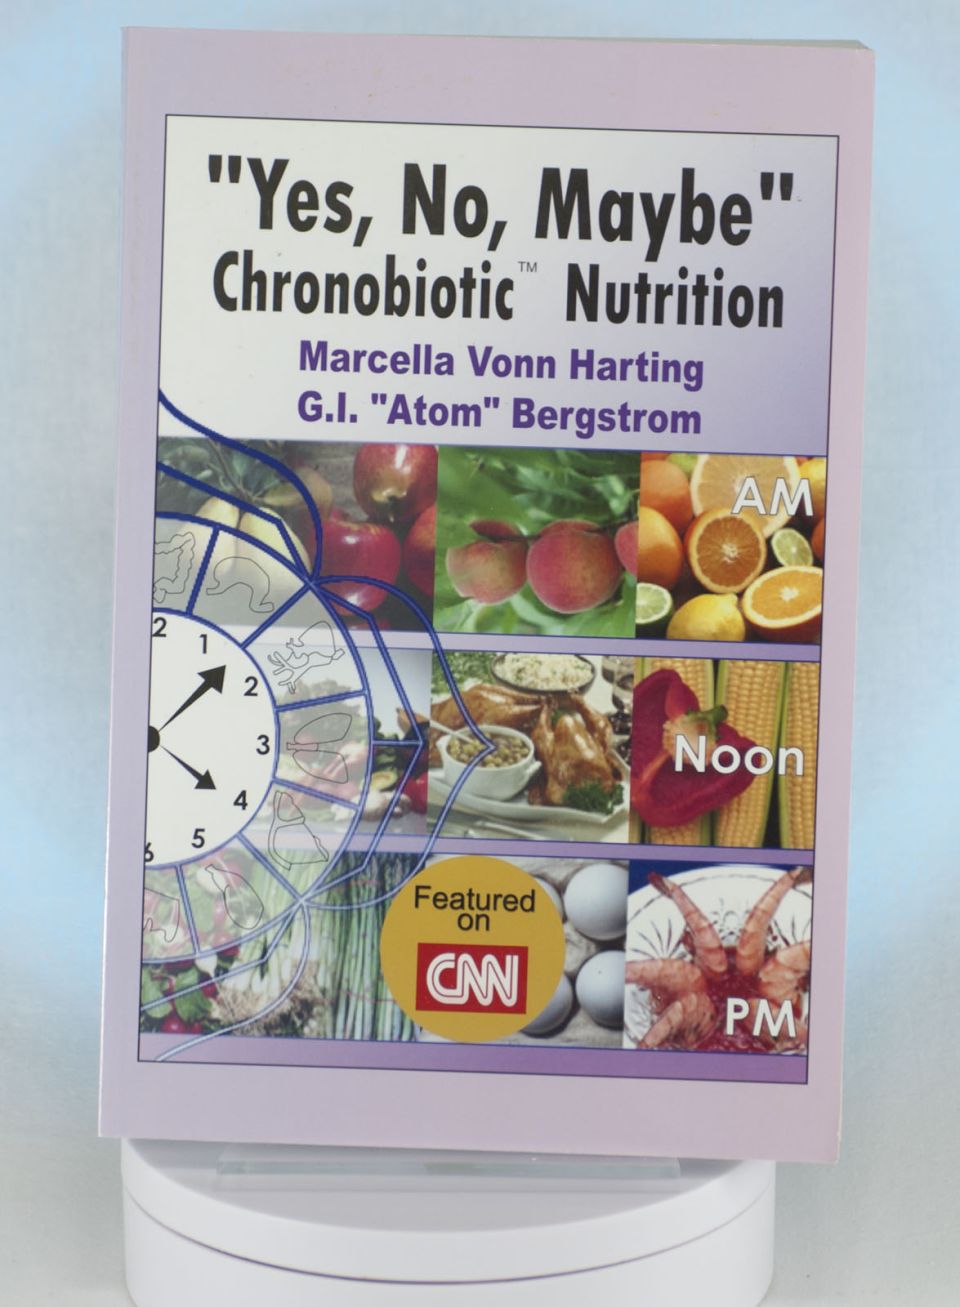 Yes No Maybe: Chronobiotic Nutrition